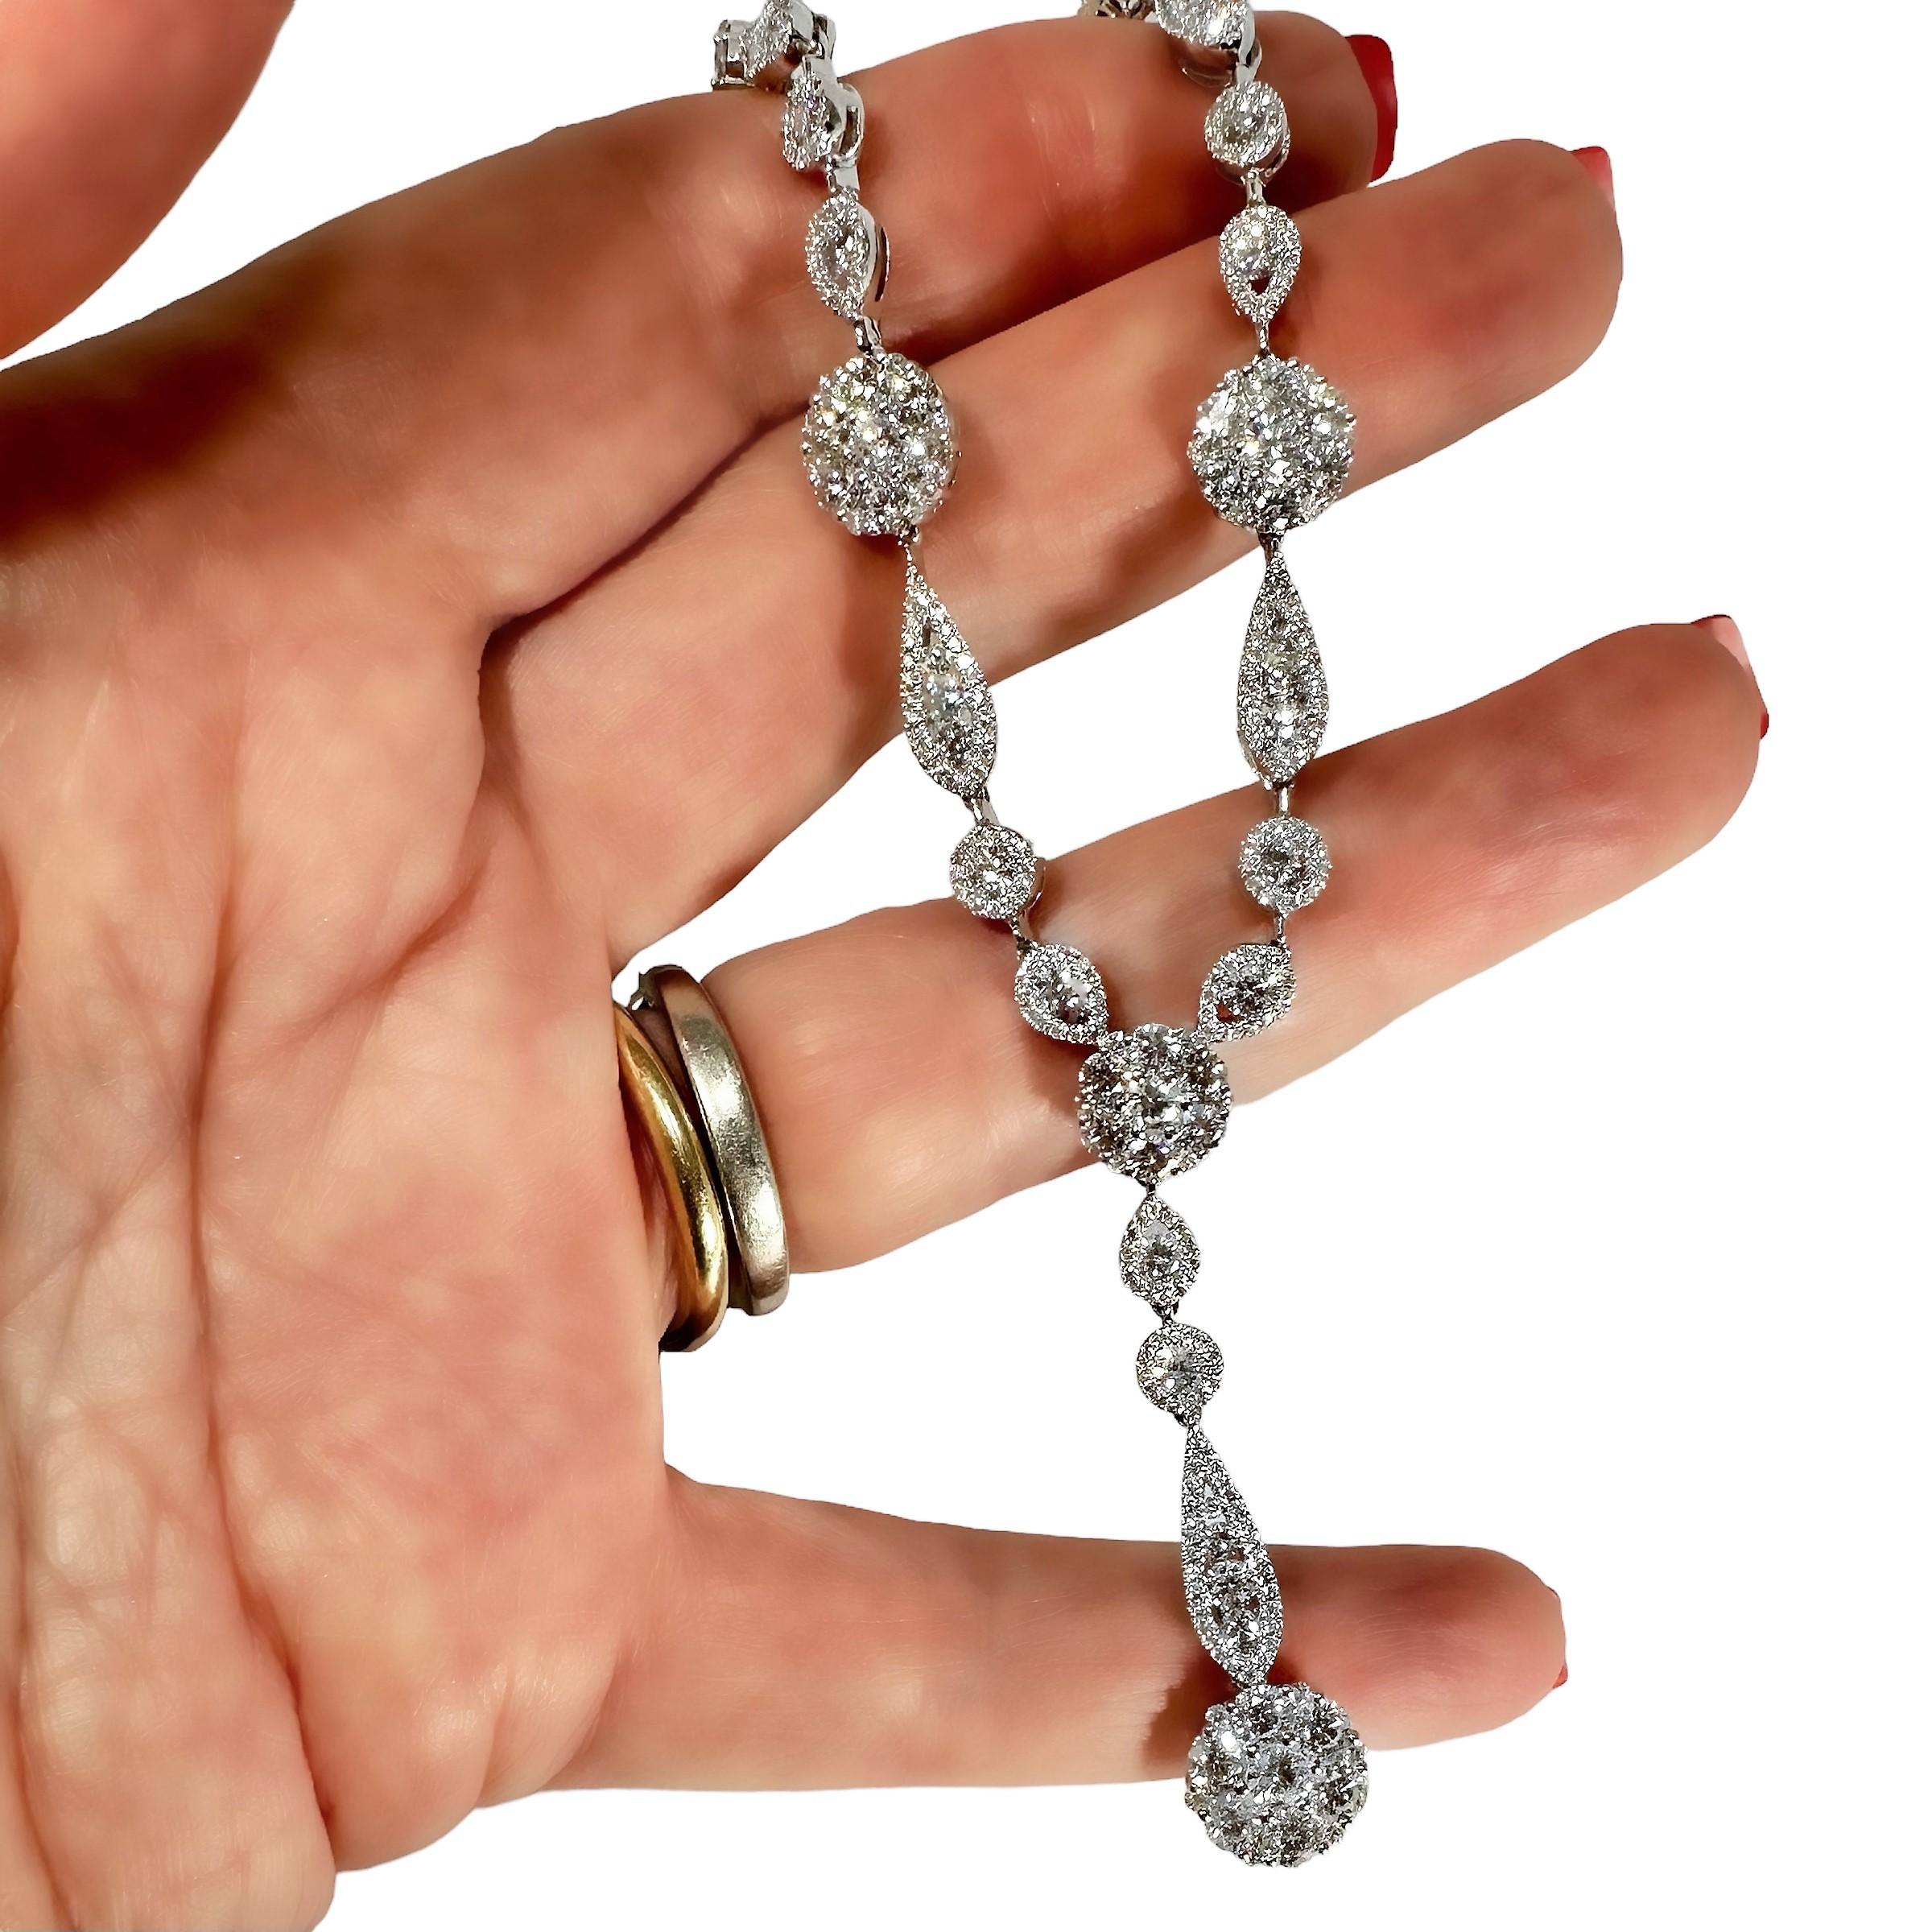 Brilliant Cut Scintillating Modern 18K White Gold Diamond Fashion Necklace with Drop For Sale